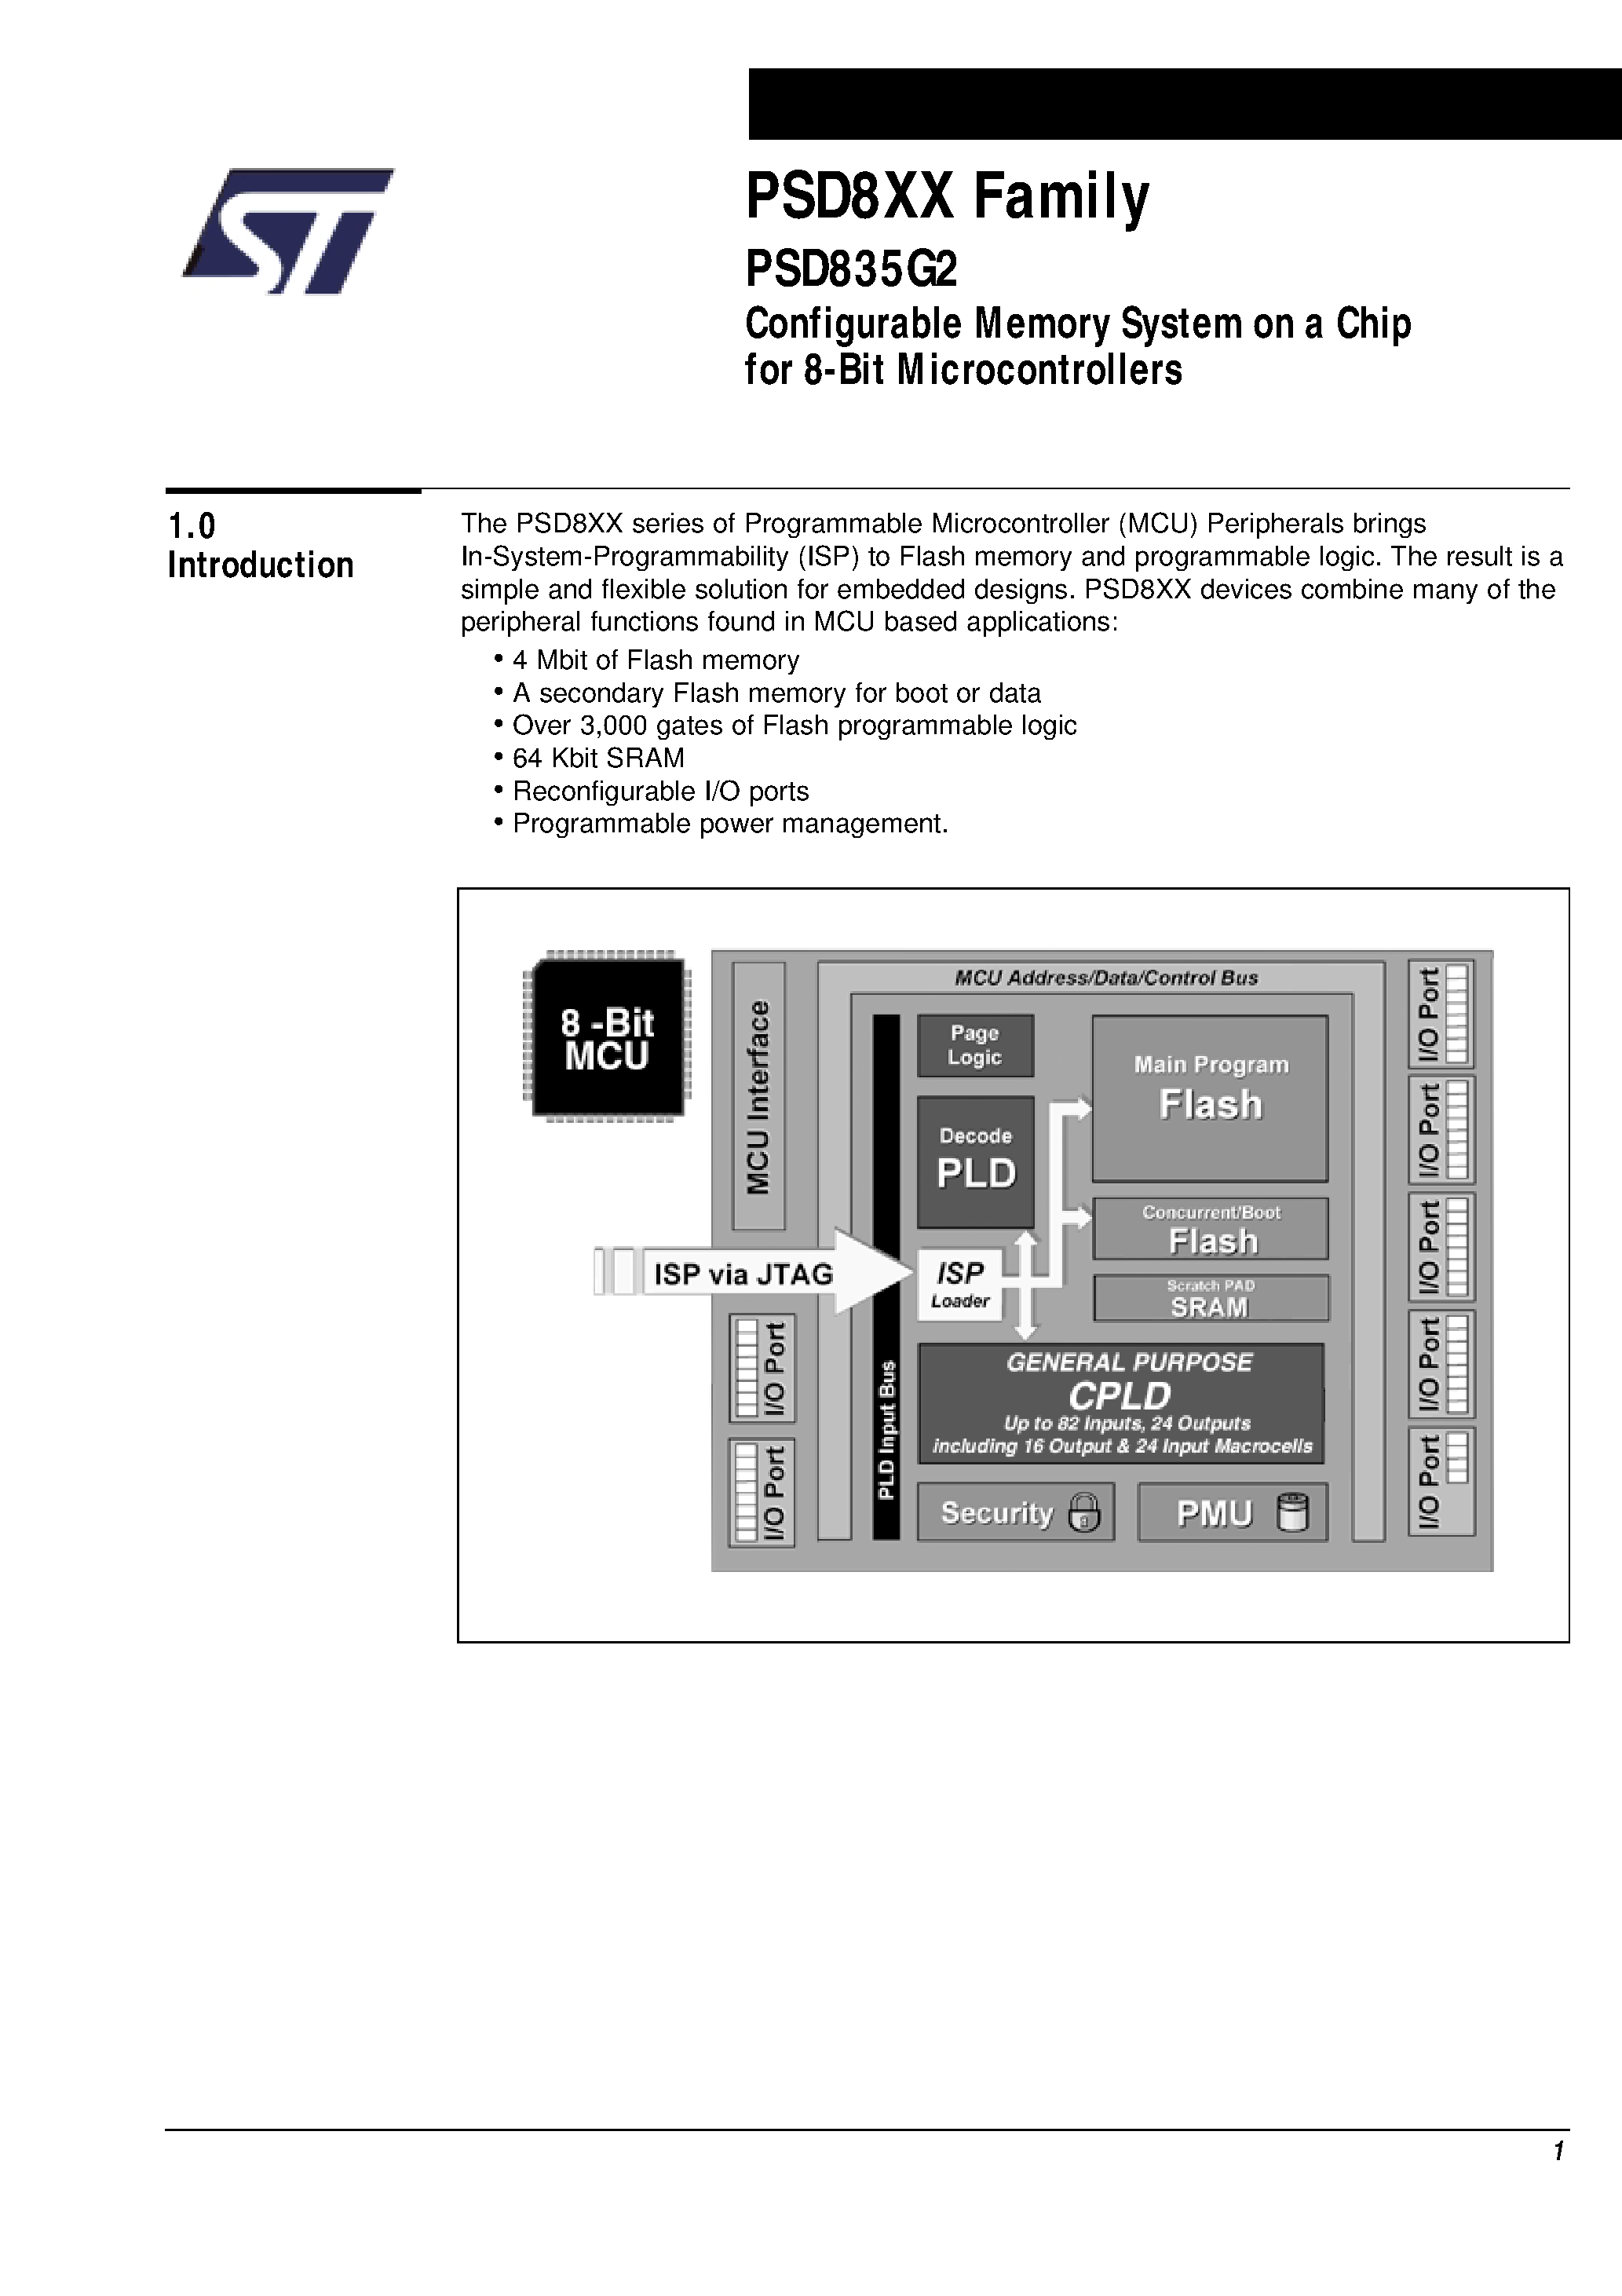 Datasheet PSD835F1V-A-70B81I - Configurable Memory System on a Chip for 8-Bit Microcontrollers page 2